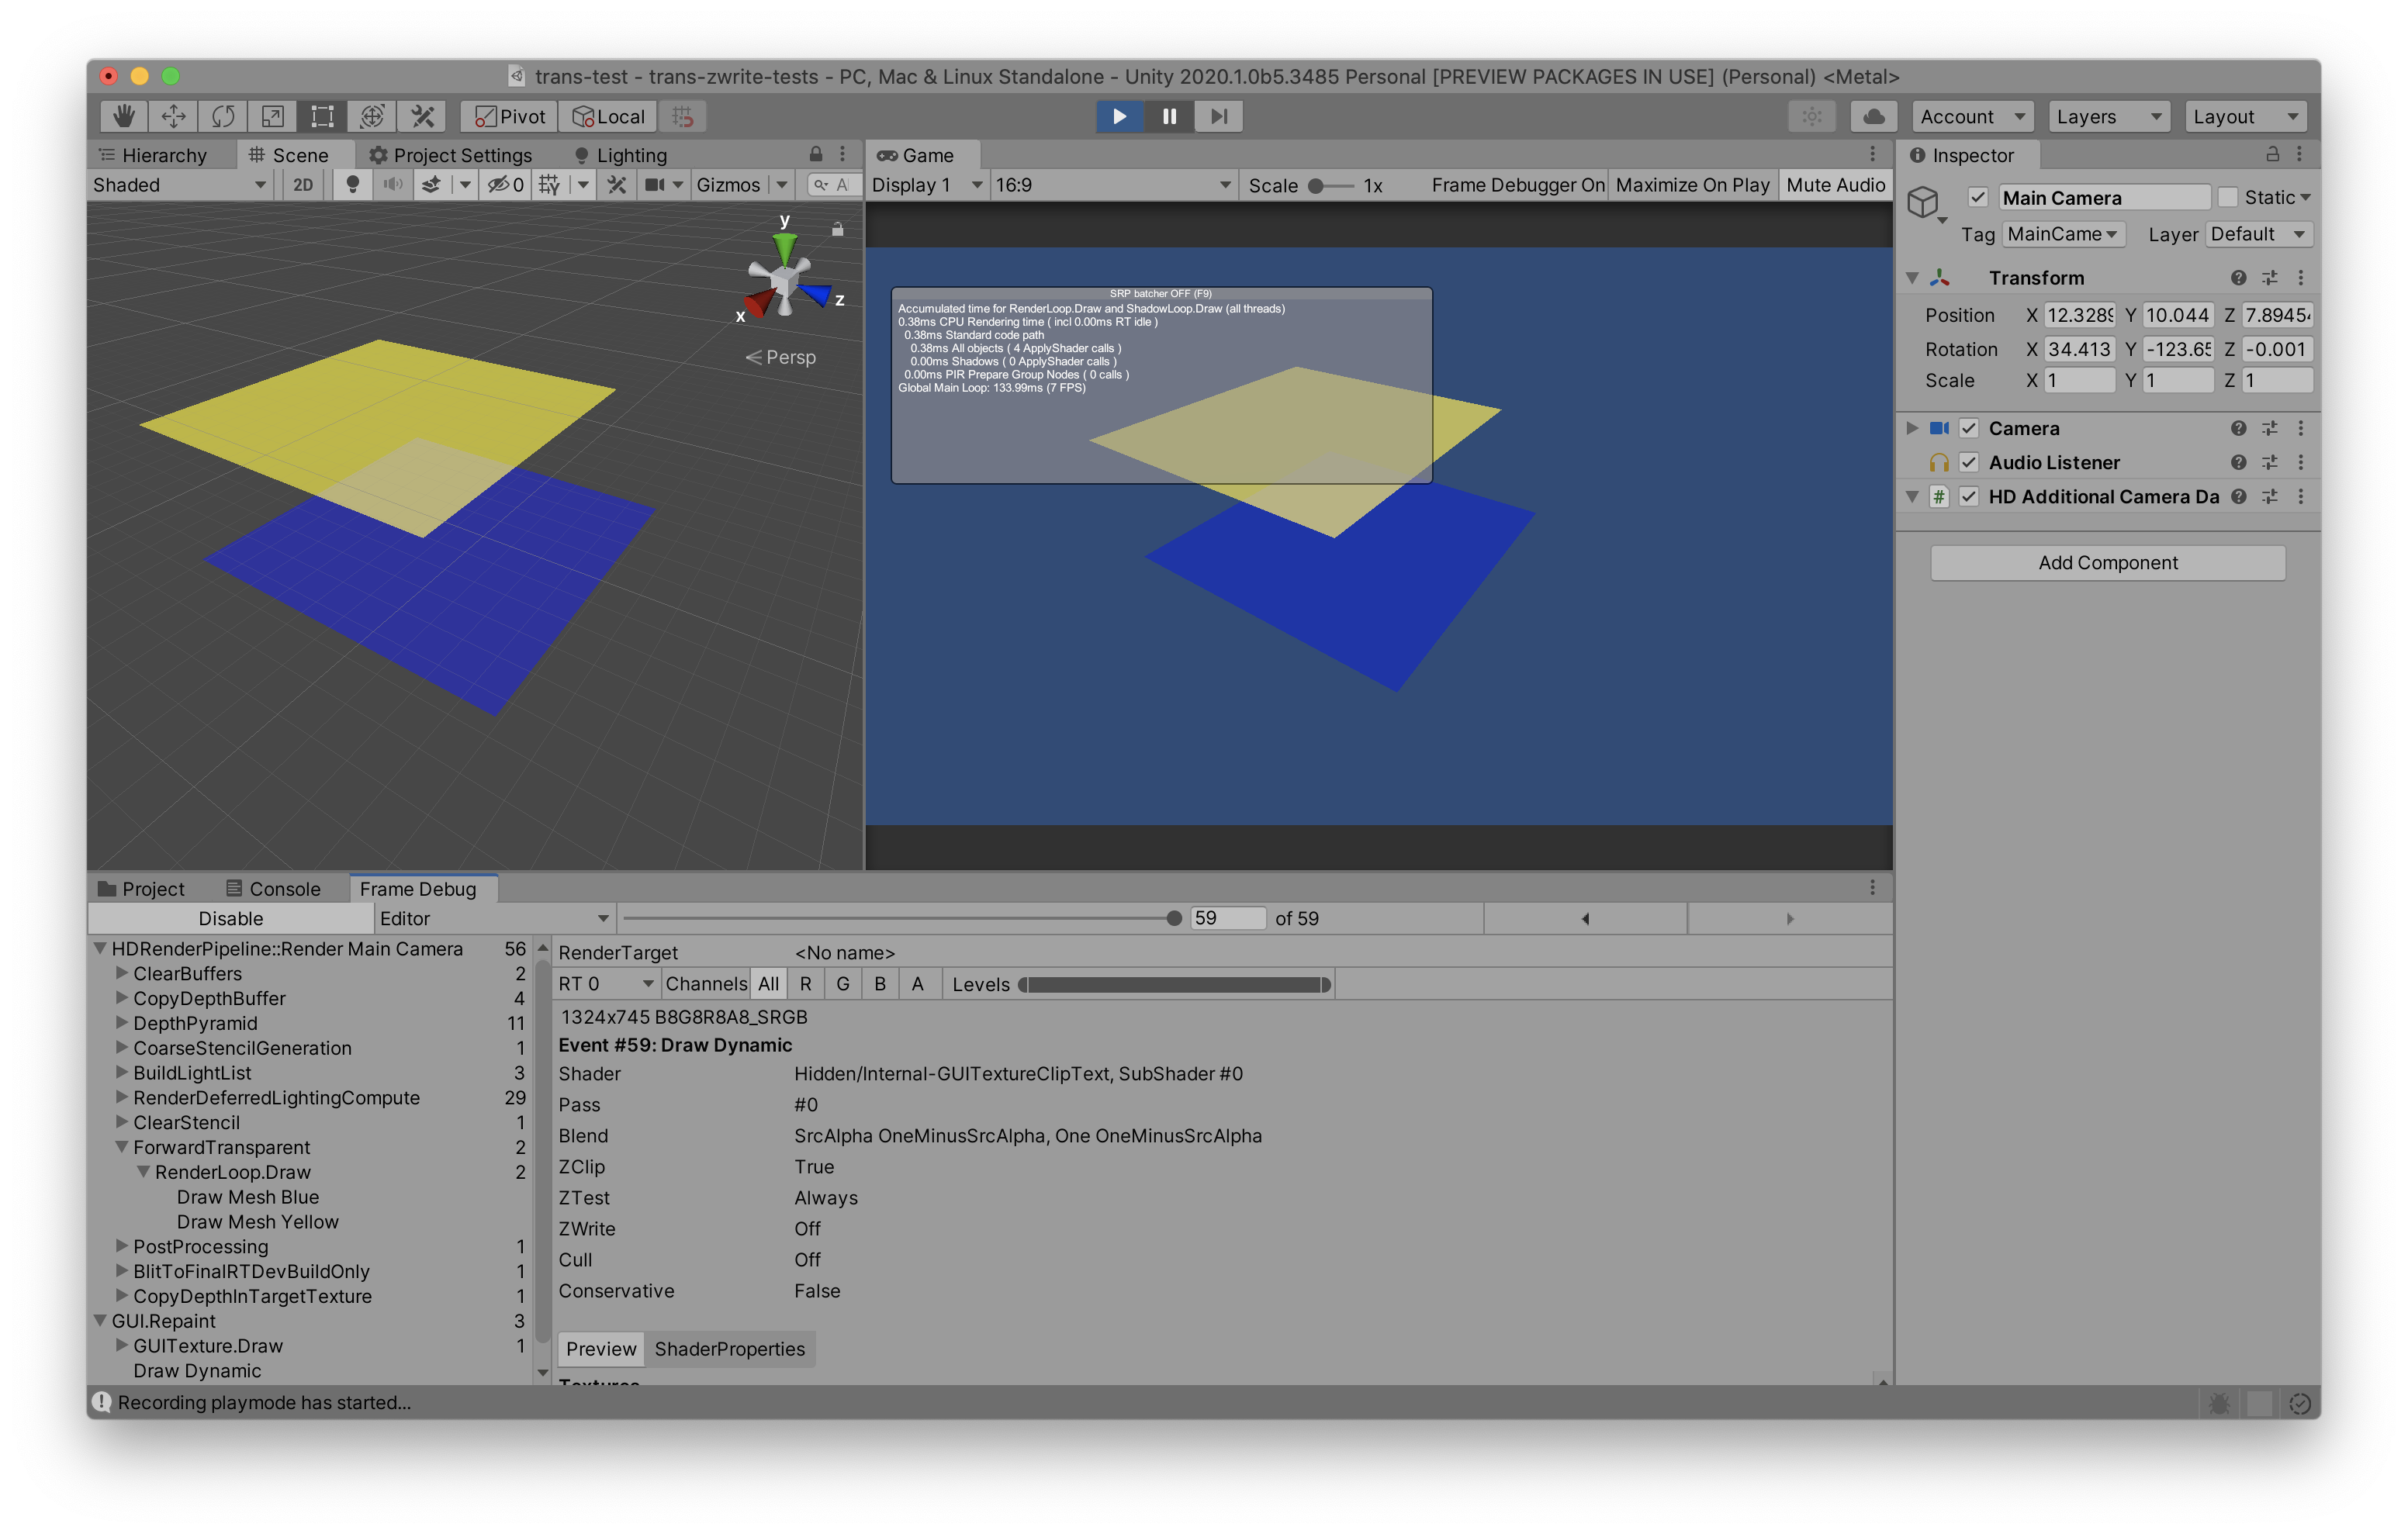 Render Mode - Transparent doesn't work see video - Unity Forum